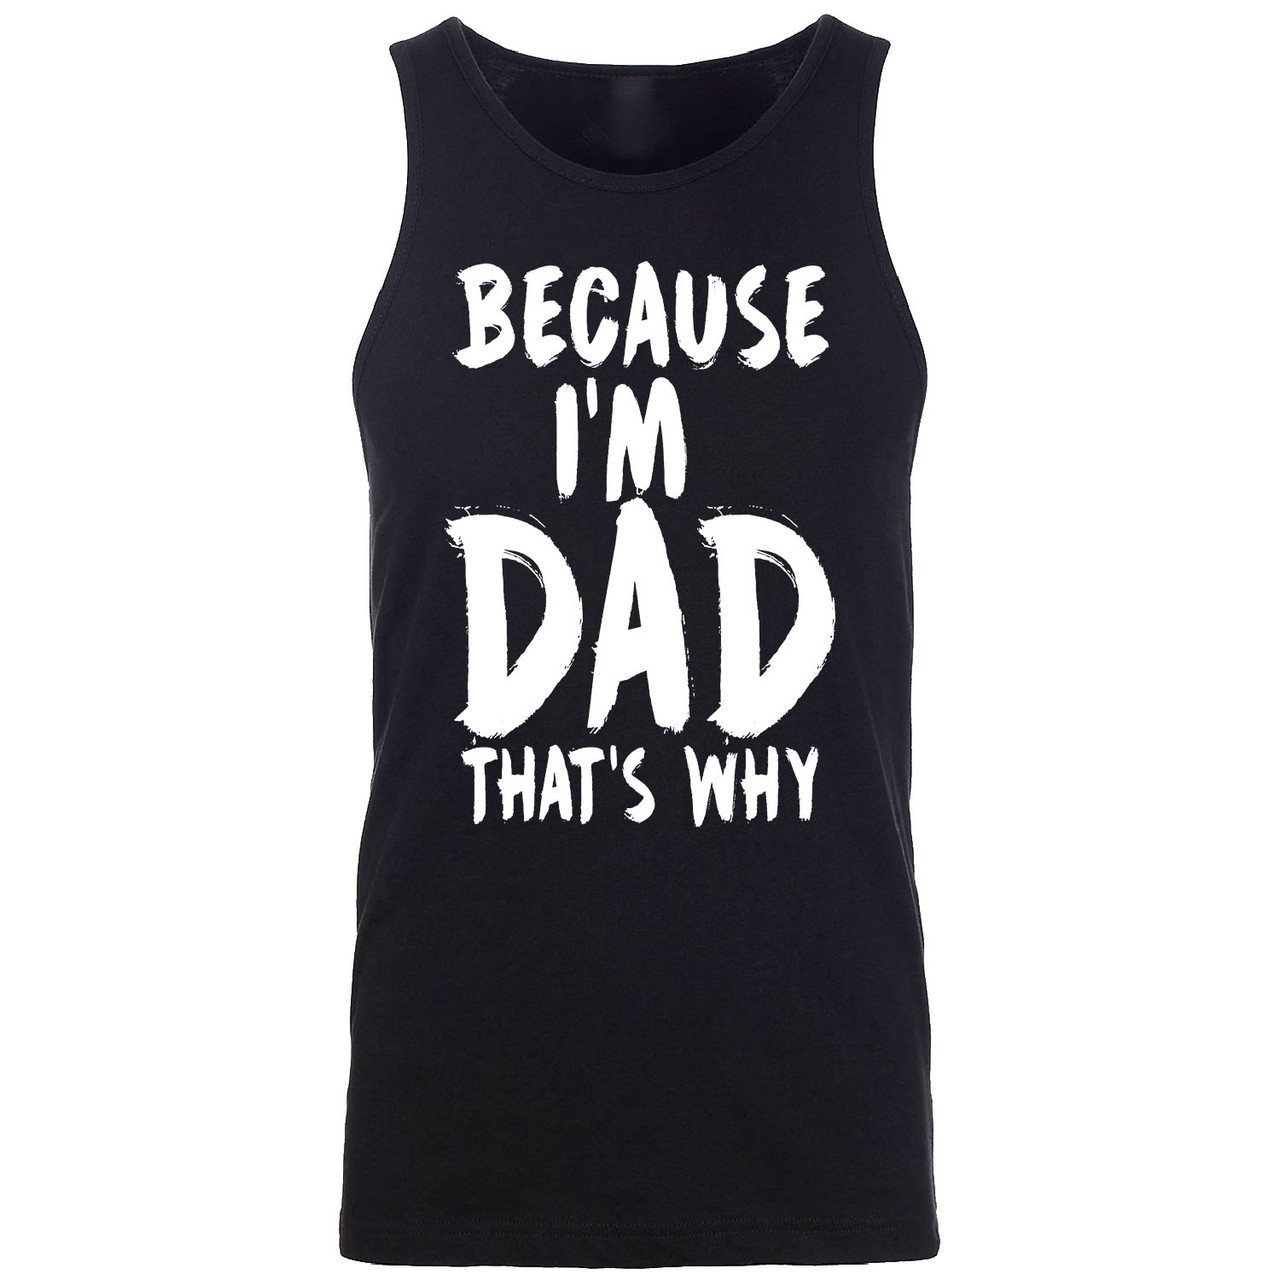 Men's Best Father's Day Ever Tank Top product image